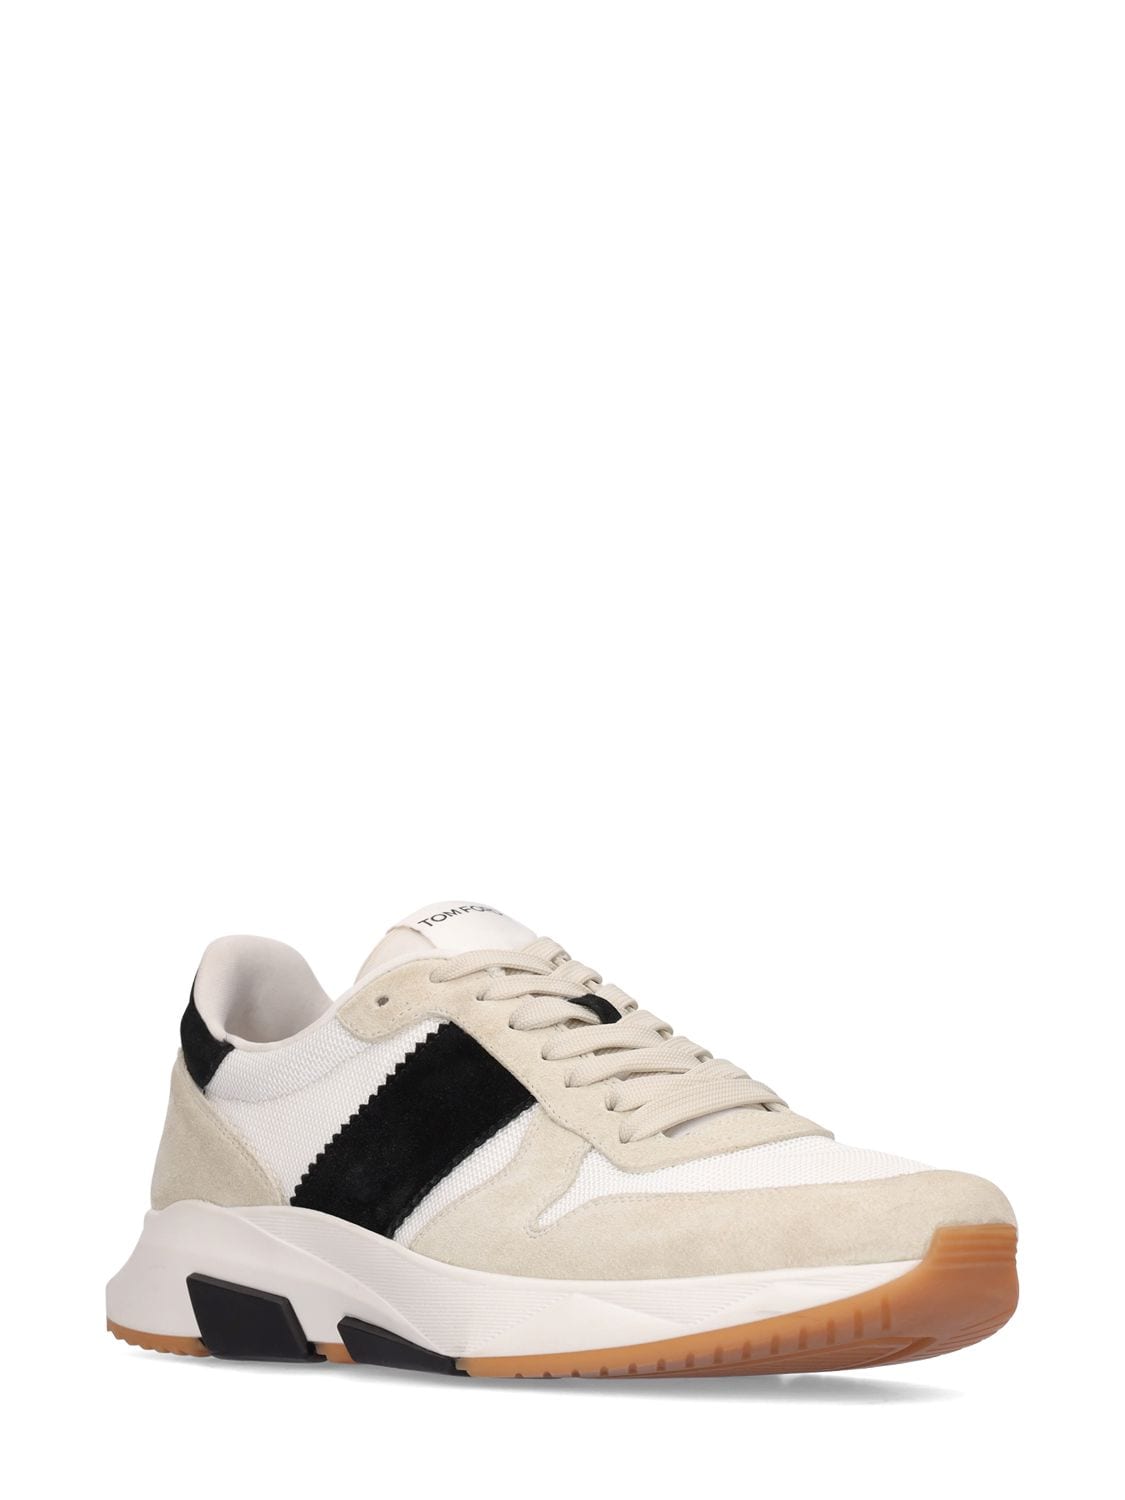 Shop Tom Ford Suede & Tech Low Top Sneakers In White,black